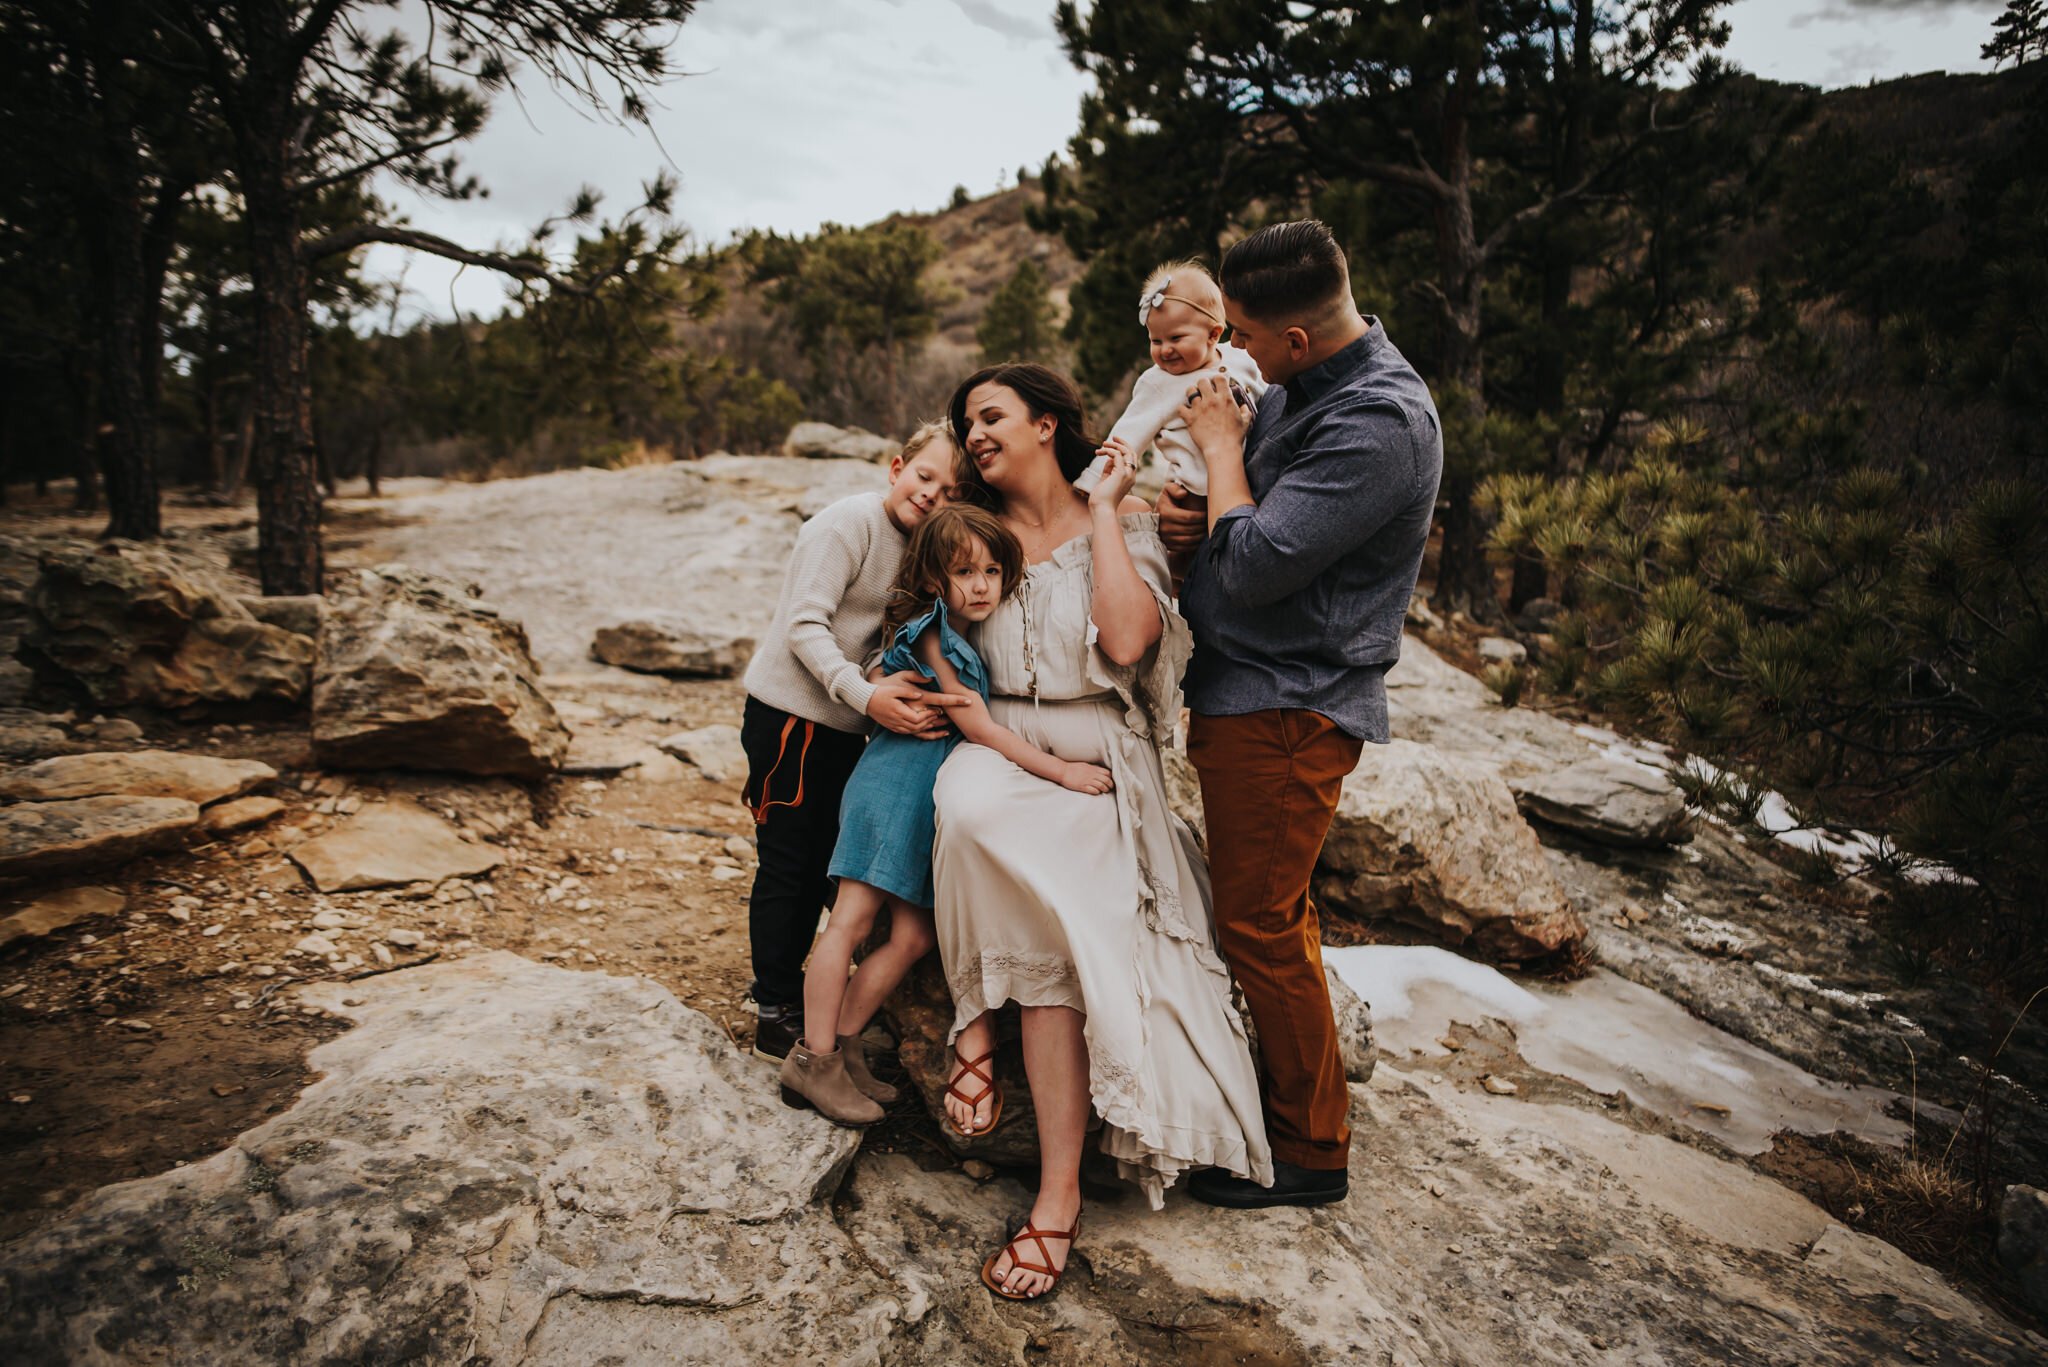 Miller+Family+Session+Mentorship+Colorado+Springs+Colorado+Sunset+Ute+Valley+Park+Mountains+Fields+Mom+Dad+Son+Daughter+Baby+Wild+Prairie+Photography-18-2020.jpeg